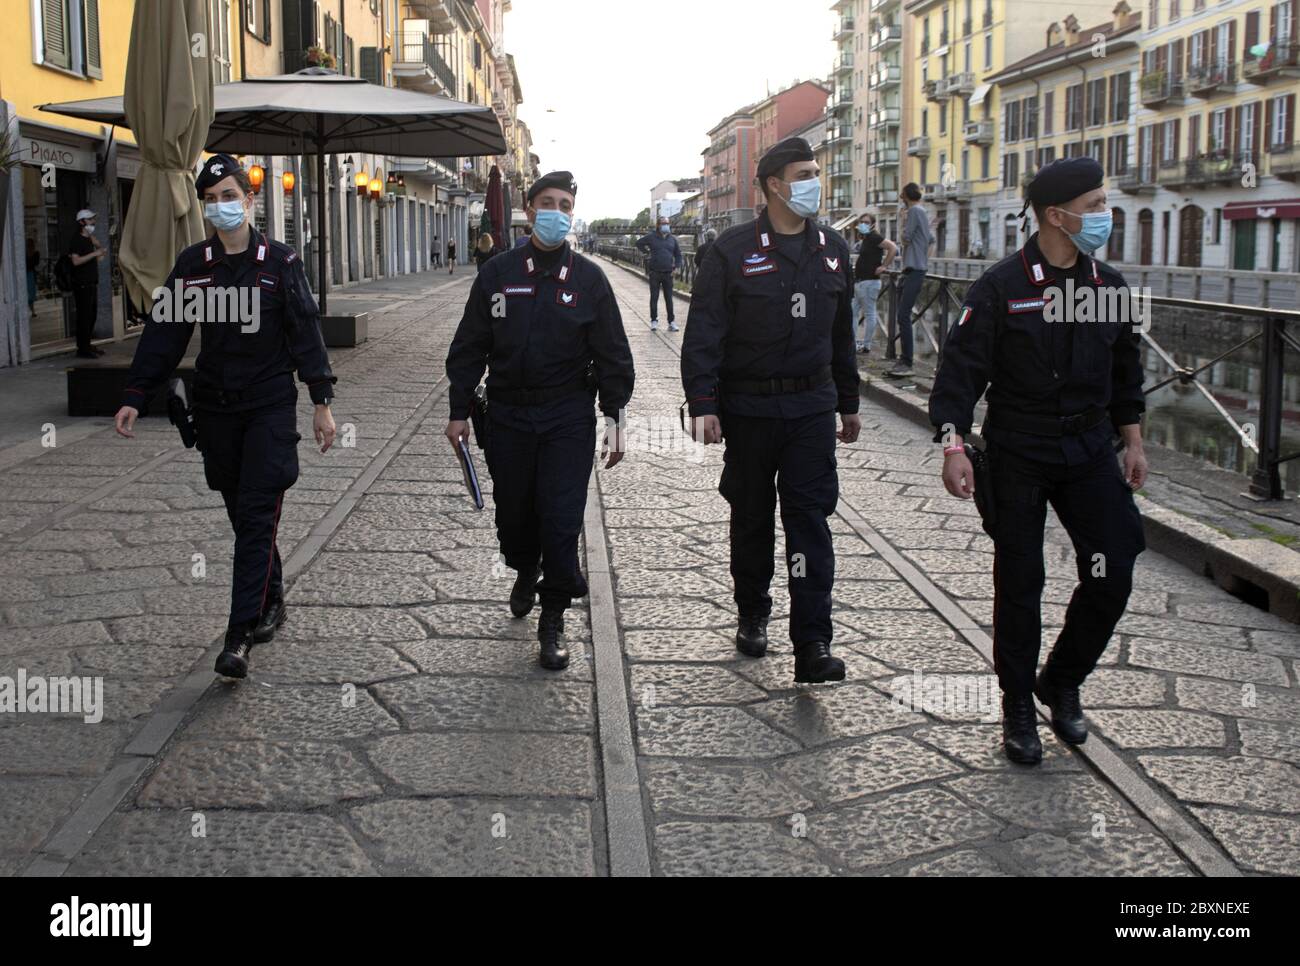 Police patrol wearing protective mask walk on the streets to keep social distance in Milan, Italy. Stock Photo